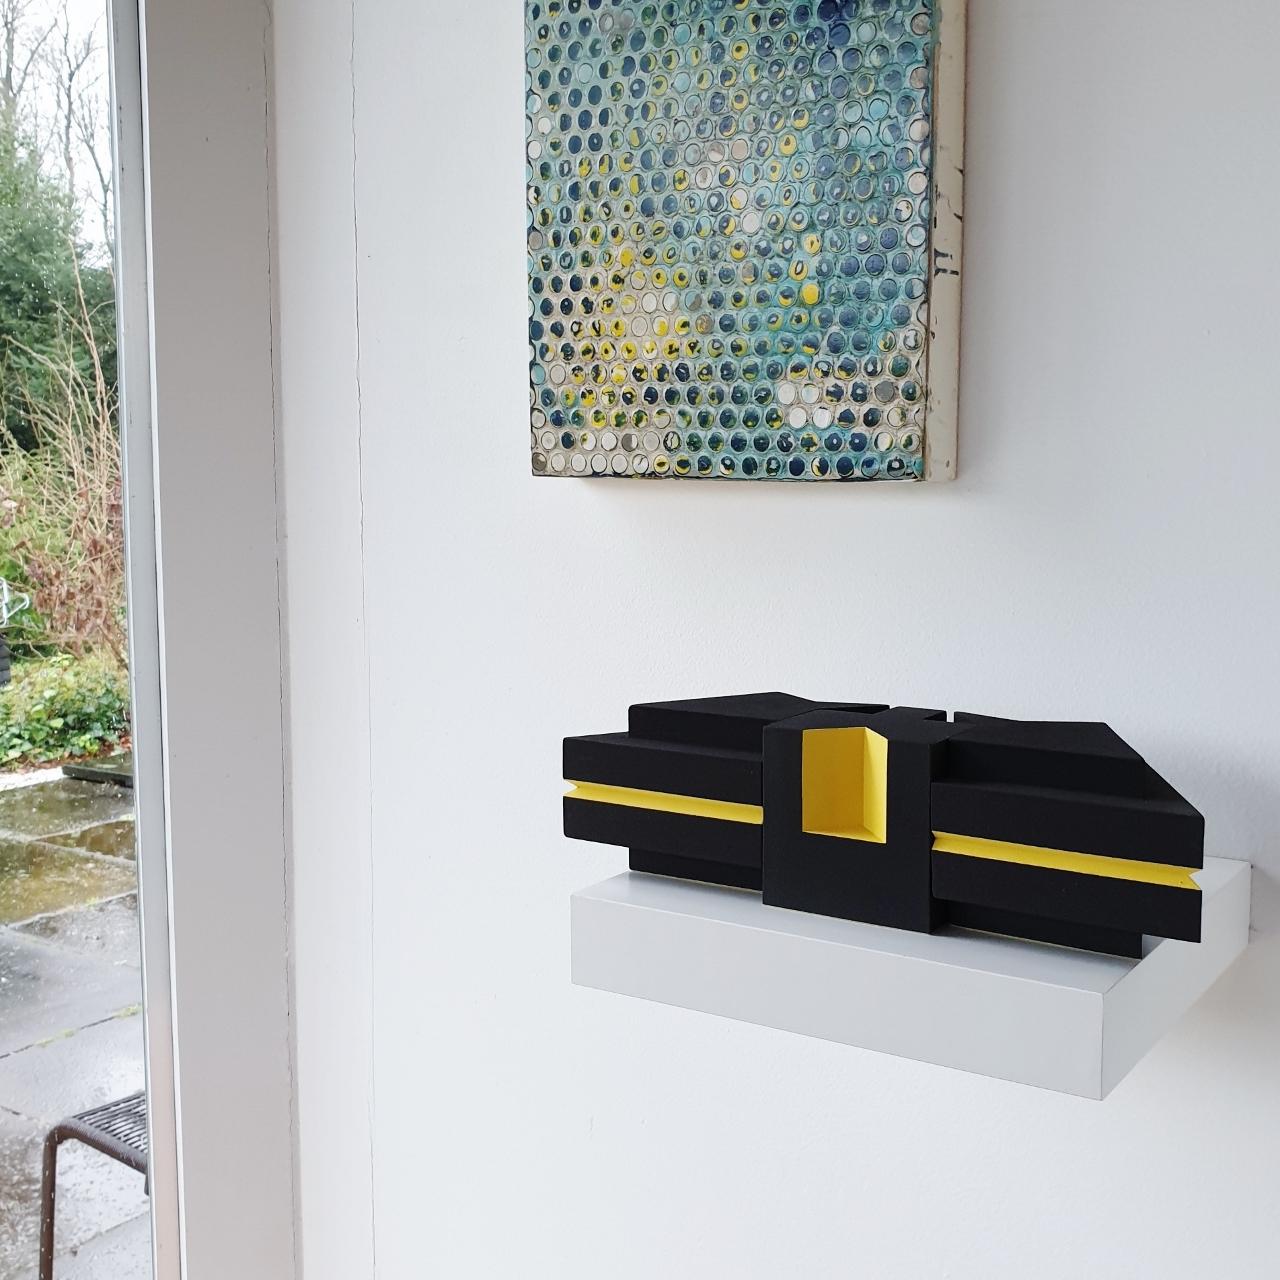 1202-03 yellow - contemporary modern abstract geometric ceramic object sculpture - Sculpture by Let de Kok